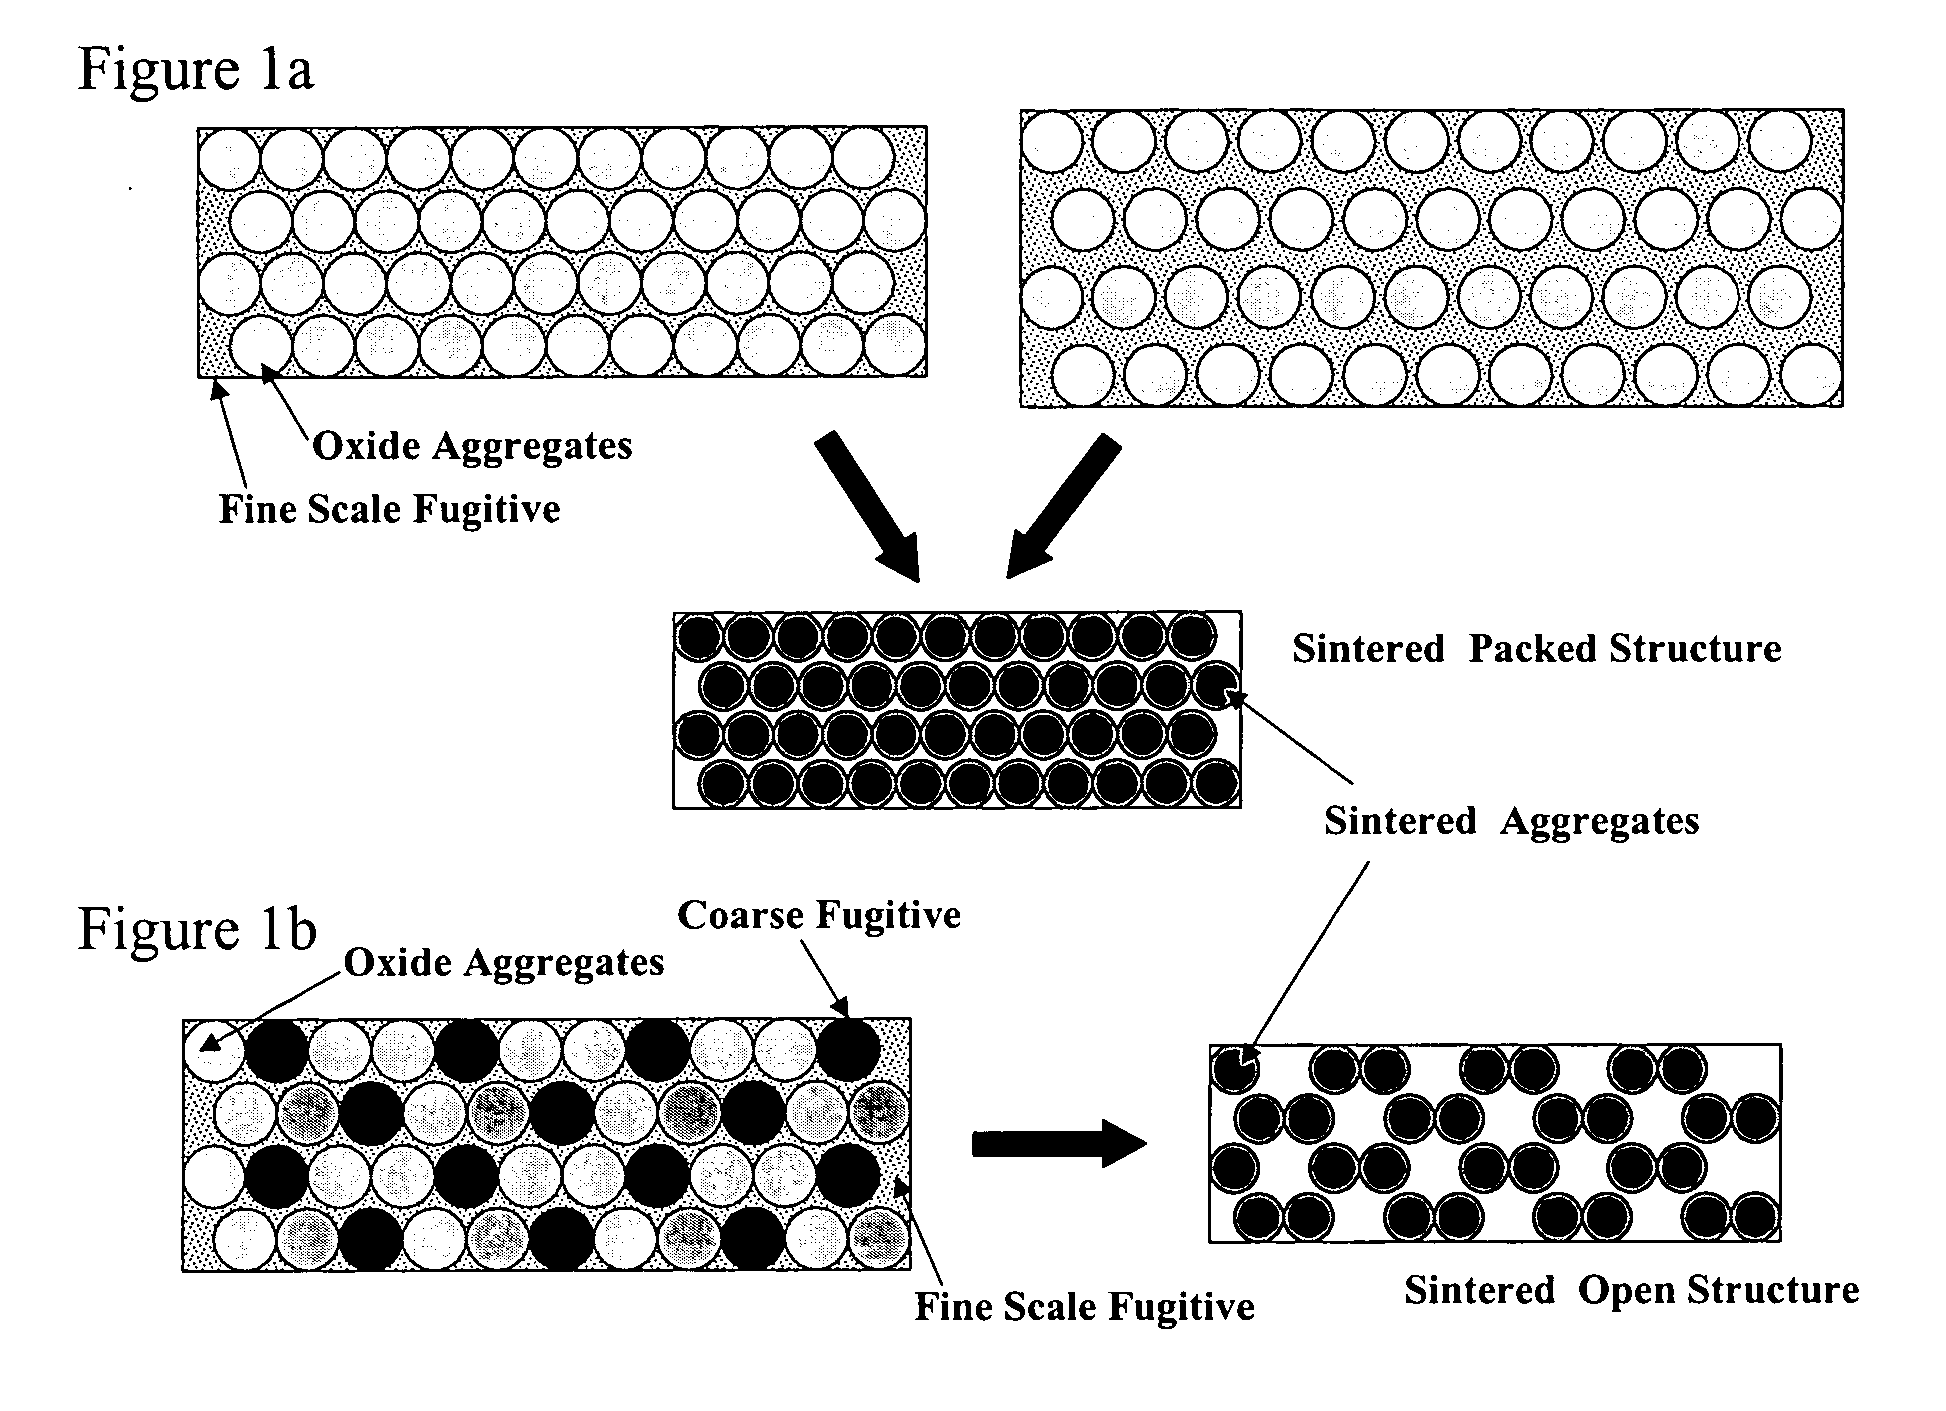 Supported ceramic membranes and electrochemical cells including the same